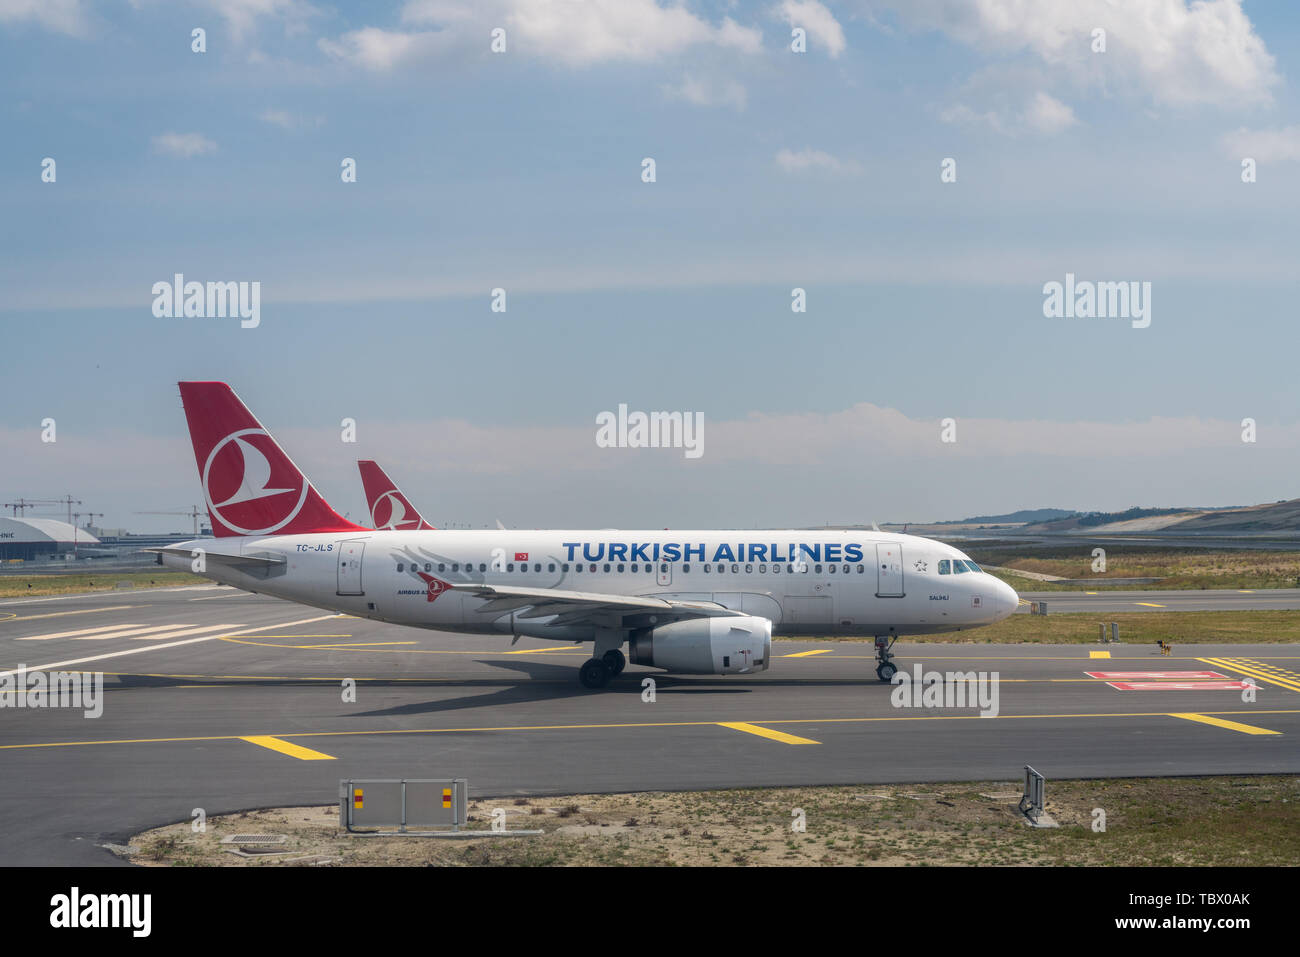 Turkish Airlines planes queue for takeoff at Istanbul Airport in Turkey Stock Photo